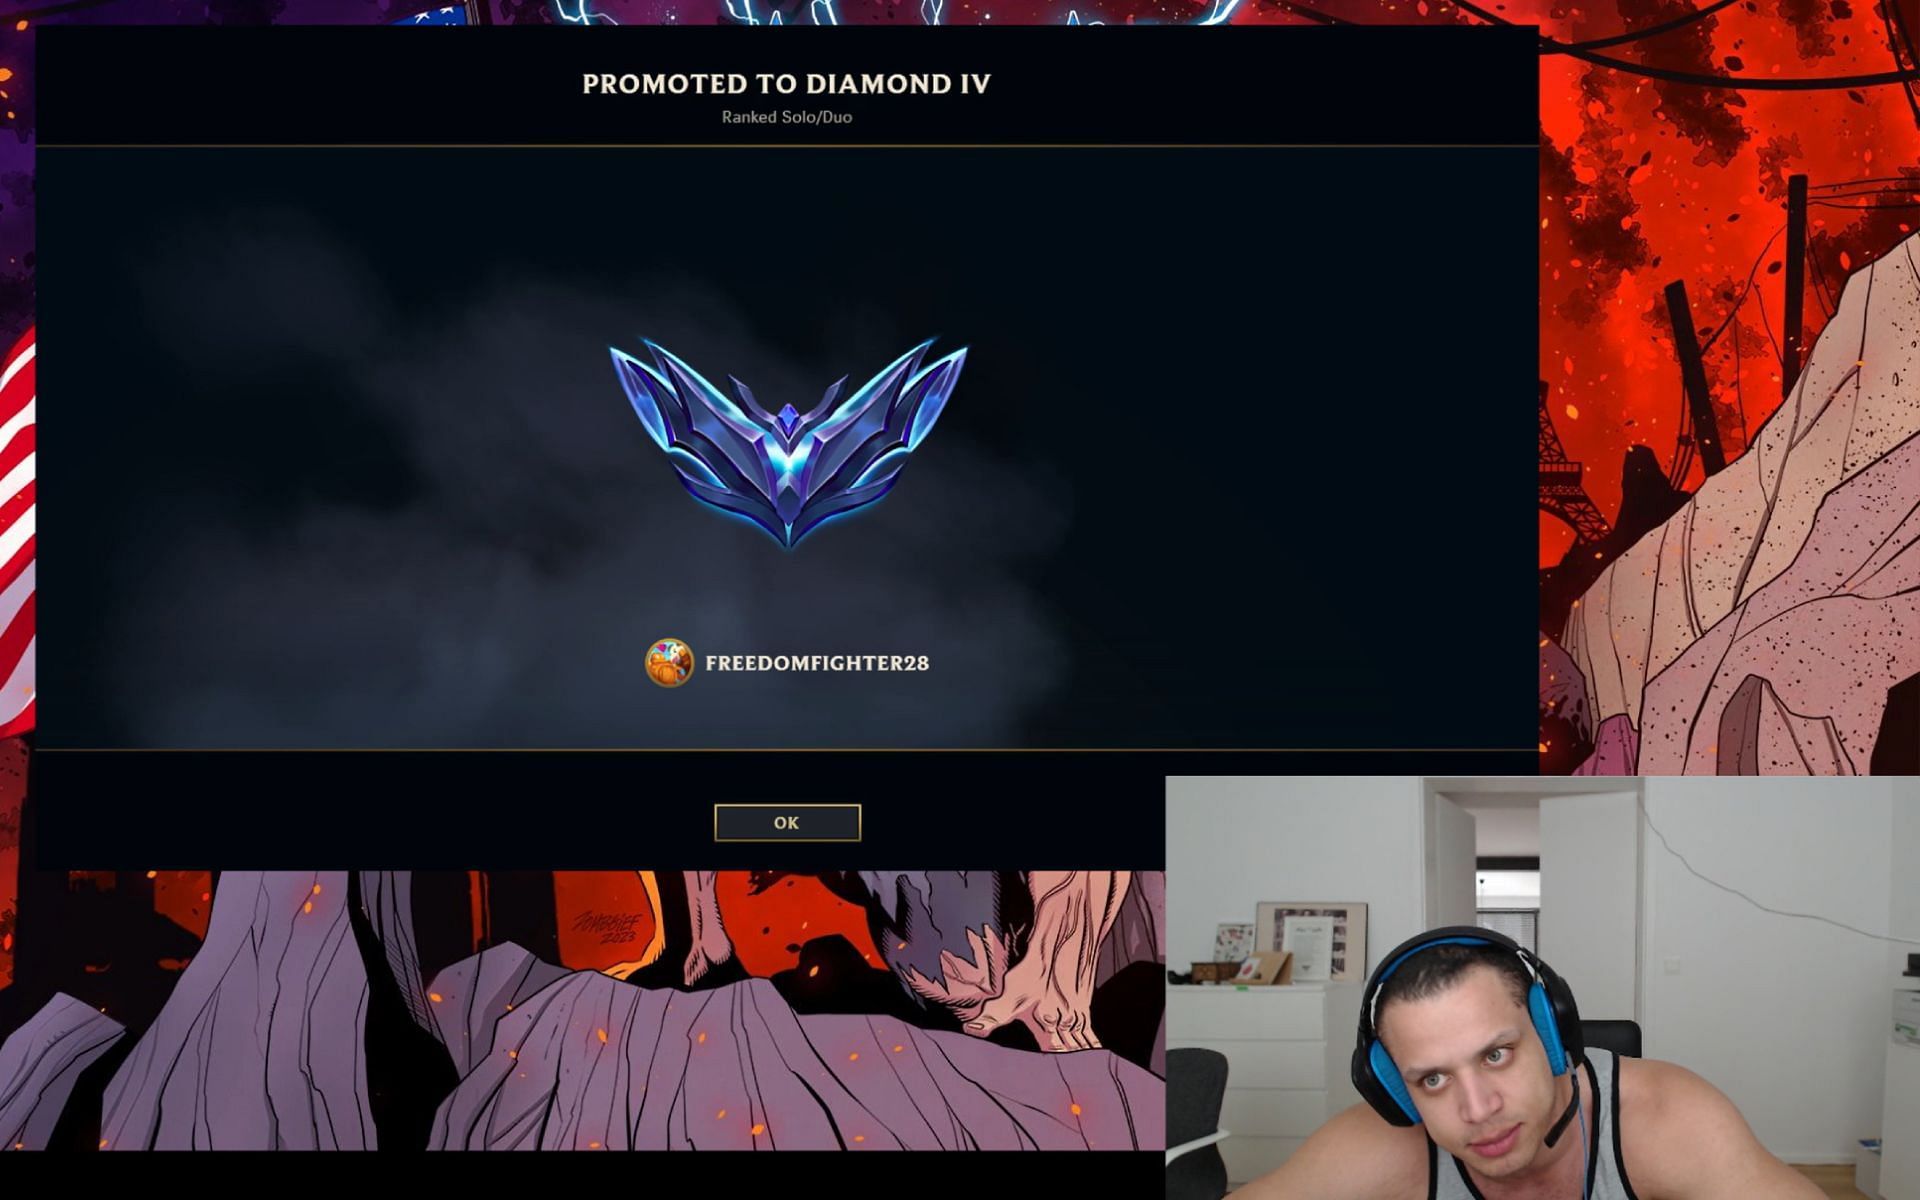 Tyler1 reached Diamond 4 on the EUW server on March 19, 2023 (Image via Tyler1/Twitch)